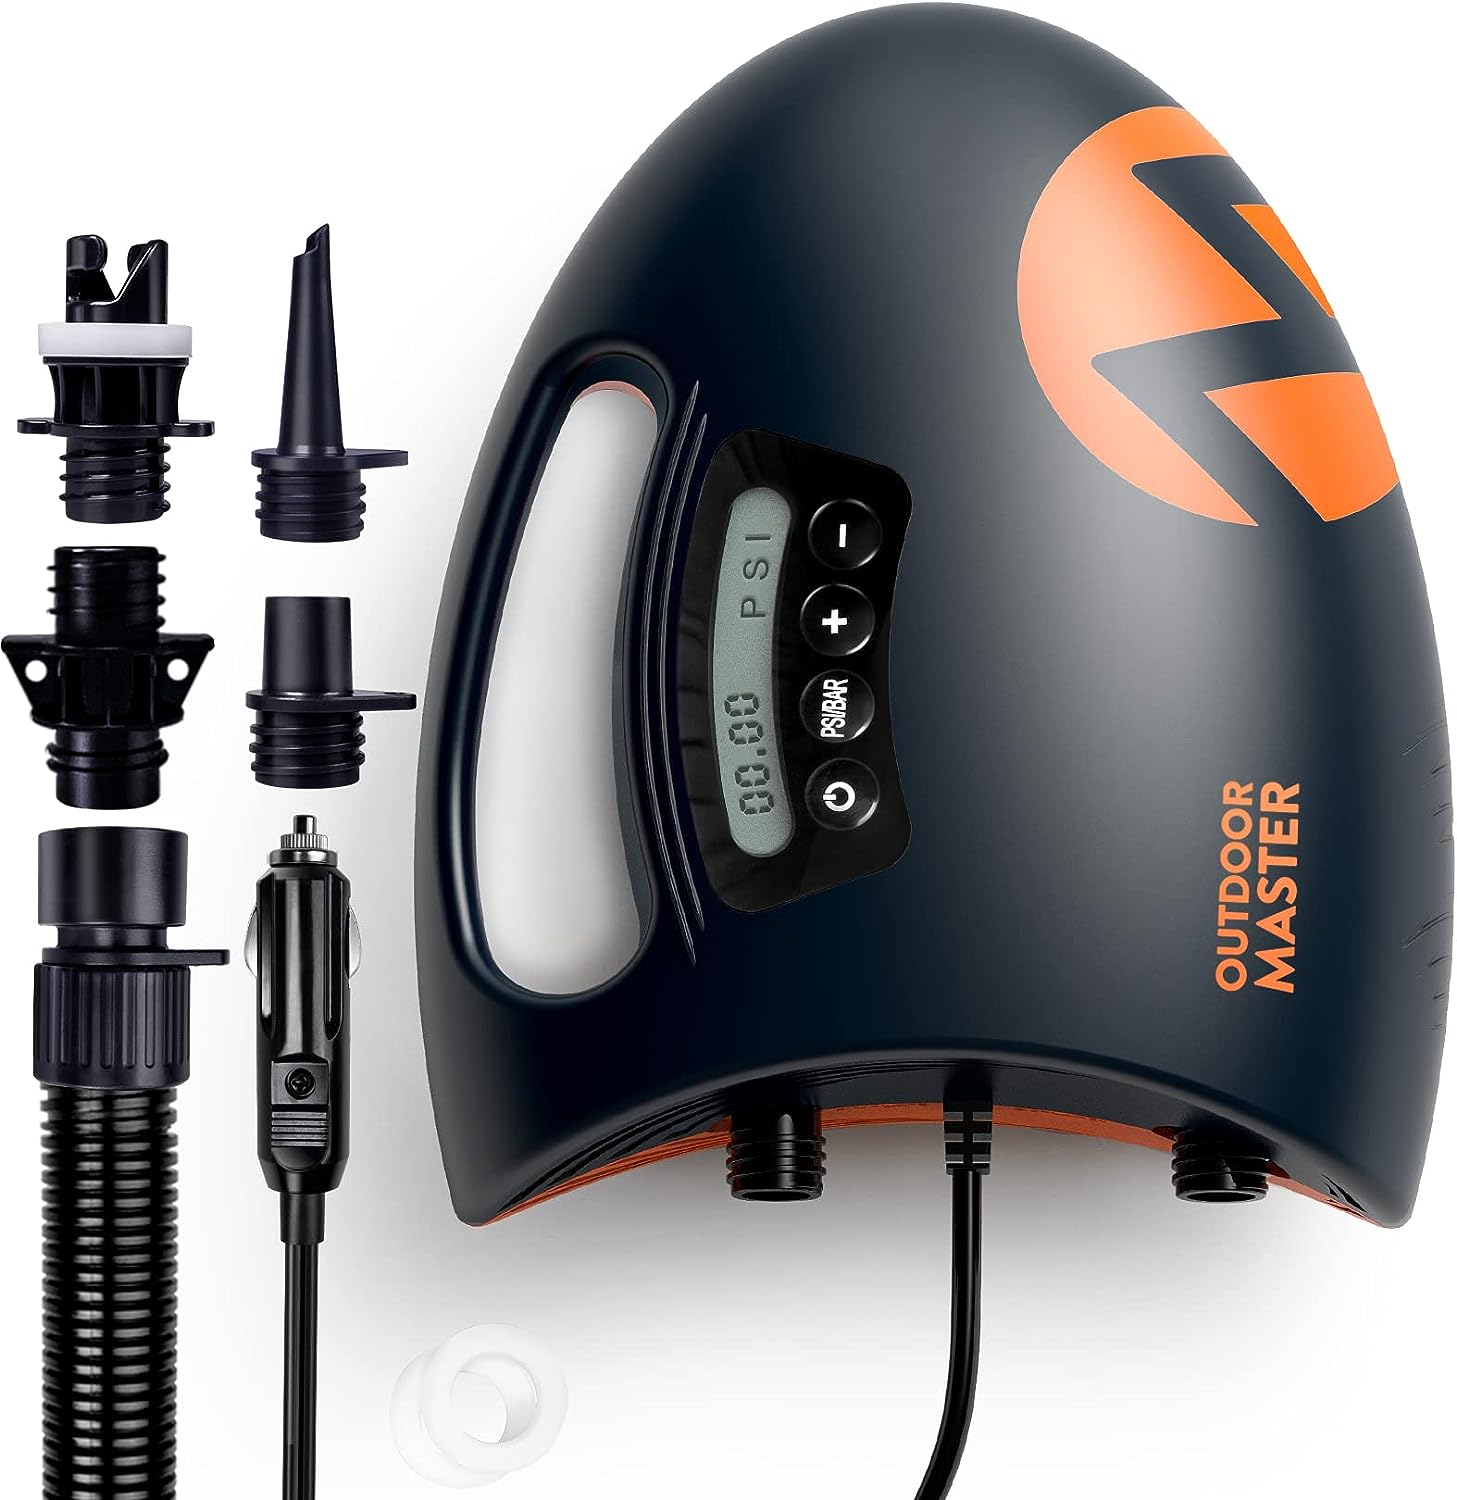 The Shark Outdoormaster SUP pump